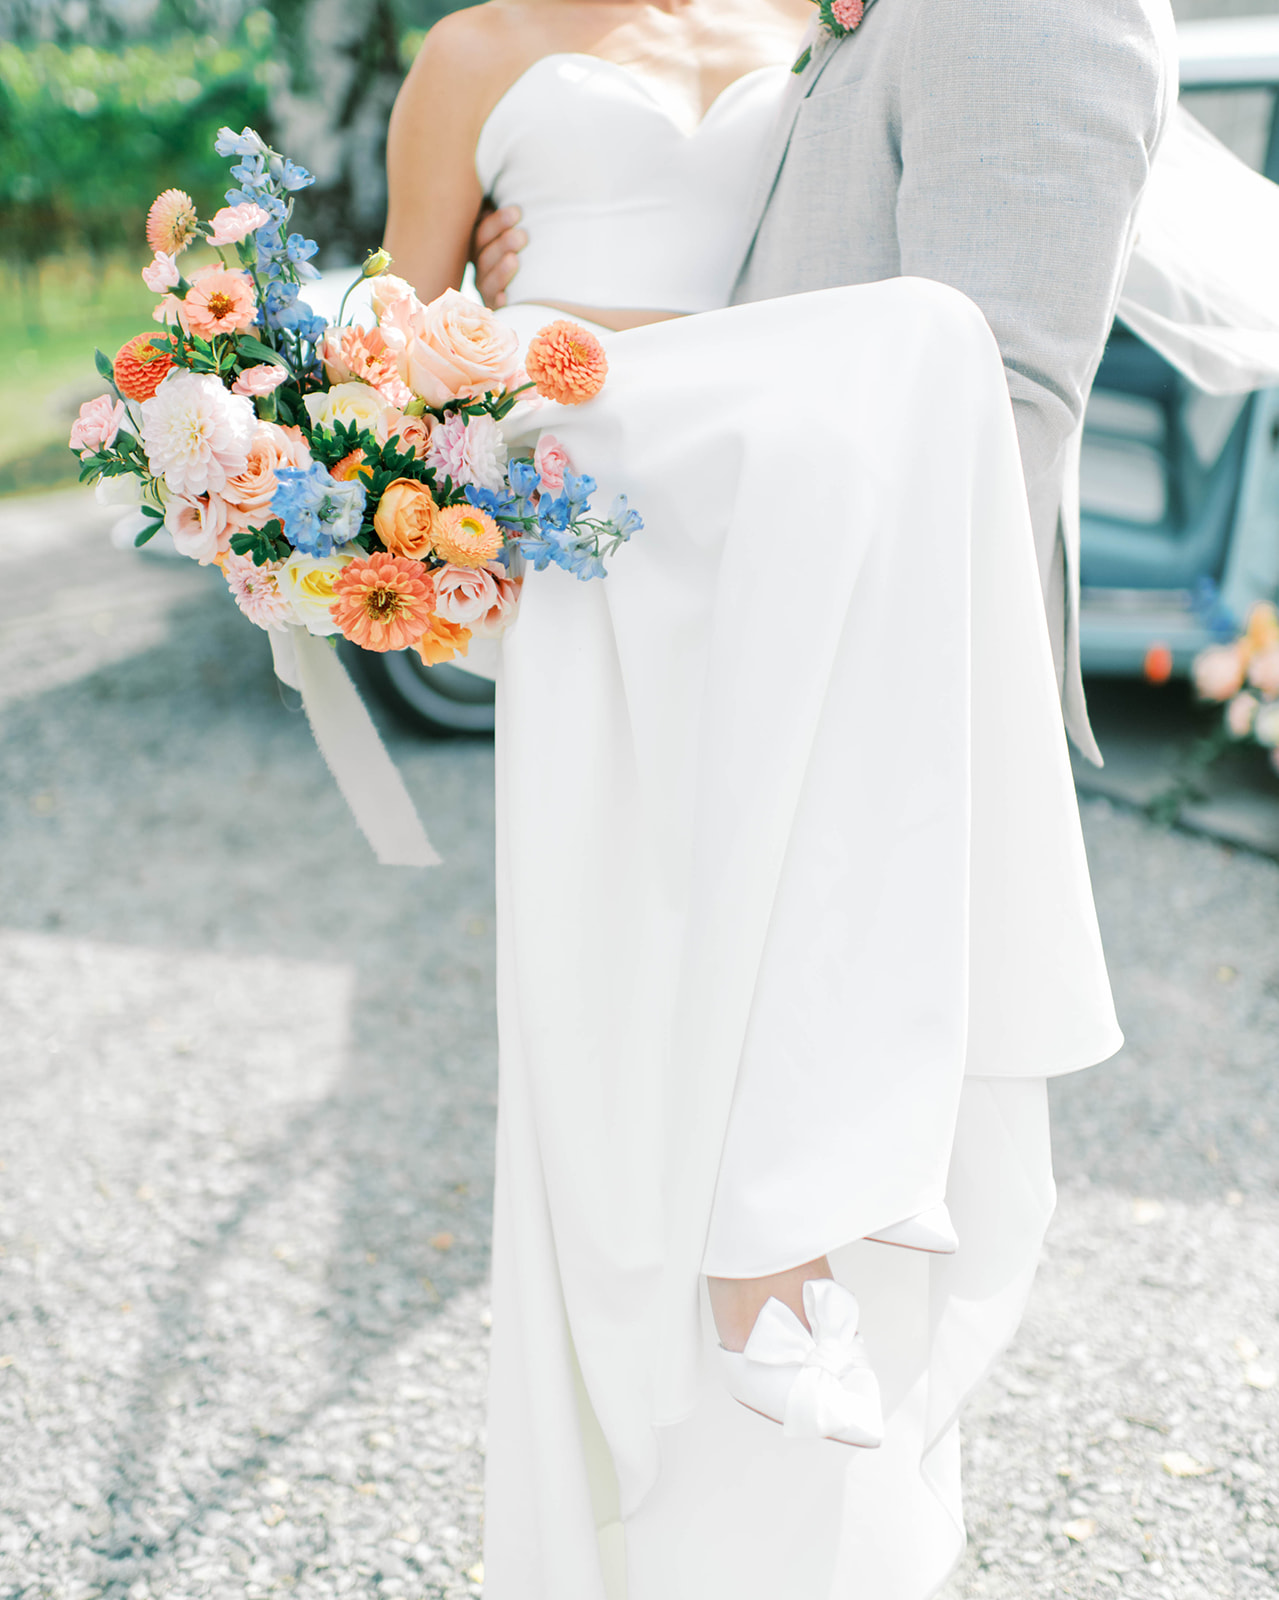 Bright summer florals in bridal bouquet adds a pop of colour to an enchanting Okanagan wedding, a glimpse of a vintage baby blue getaway car, groom carries bride in romantic couple's portrait 